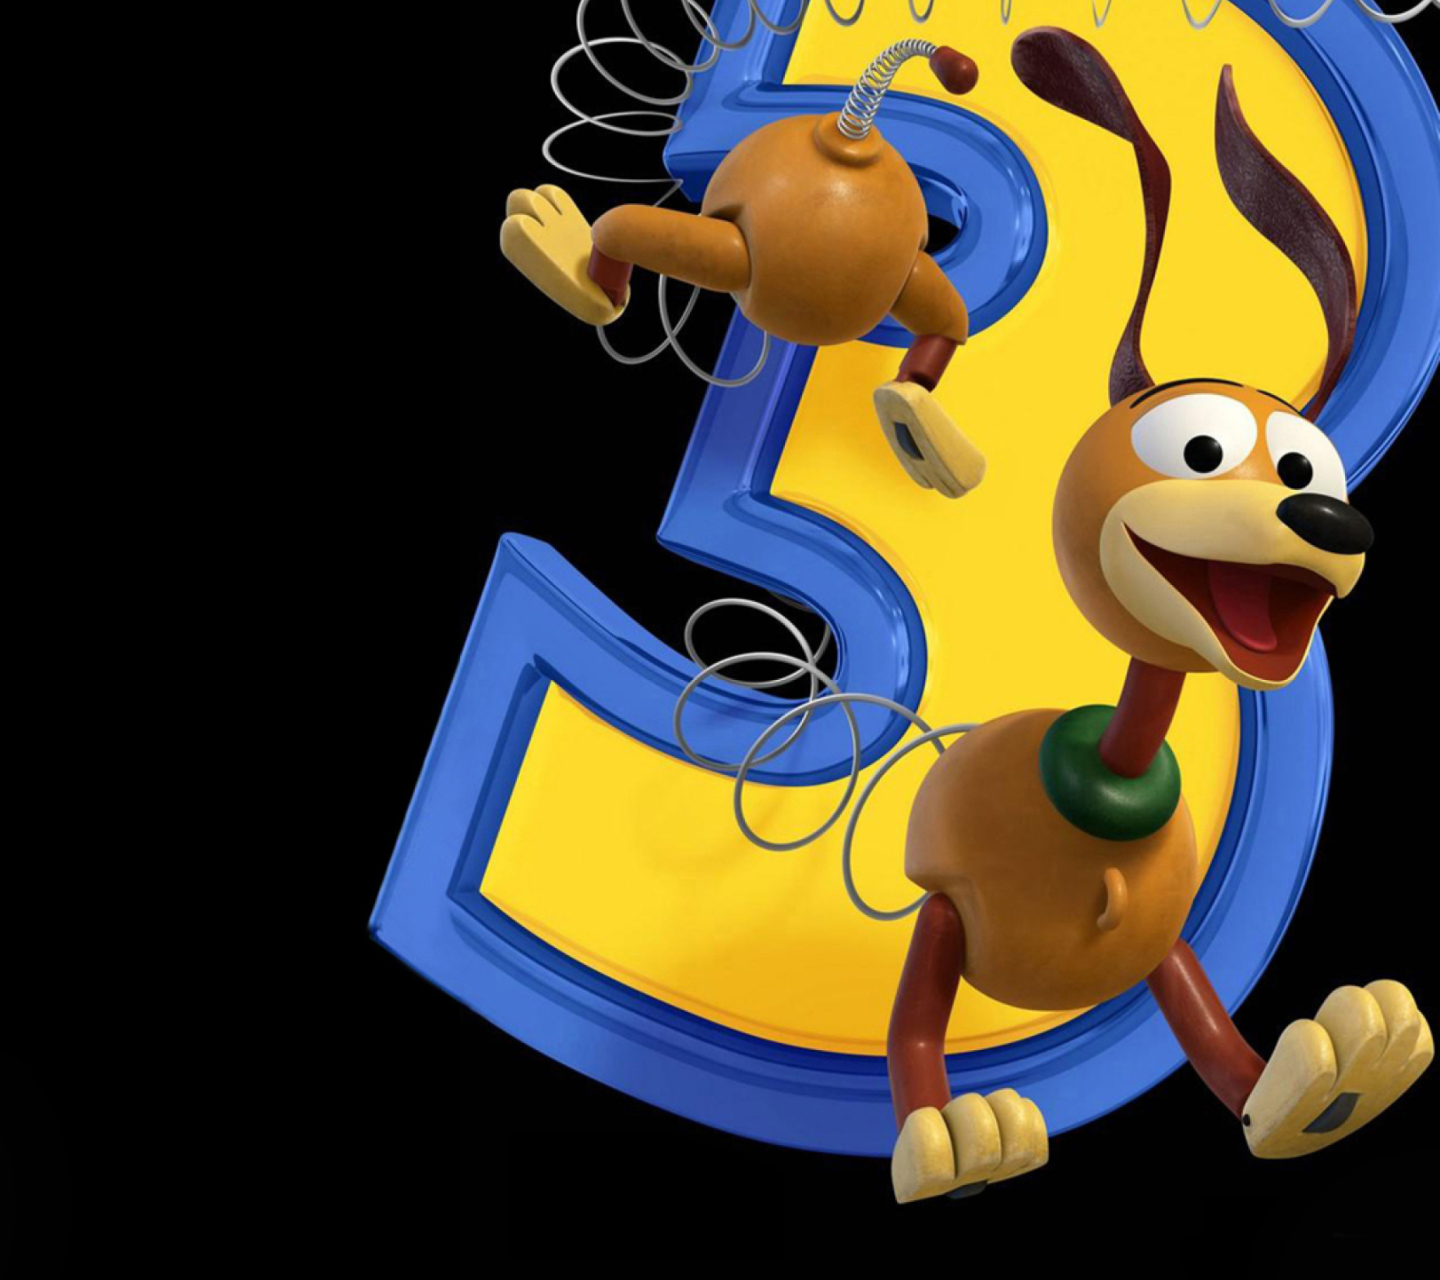 Dog From Toy Story 3 screenshot #1 1440x1280